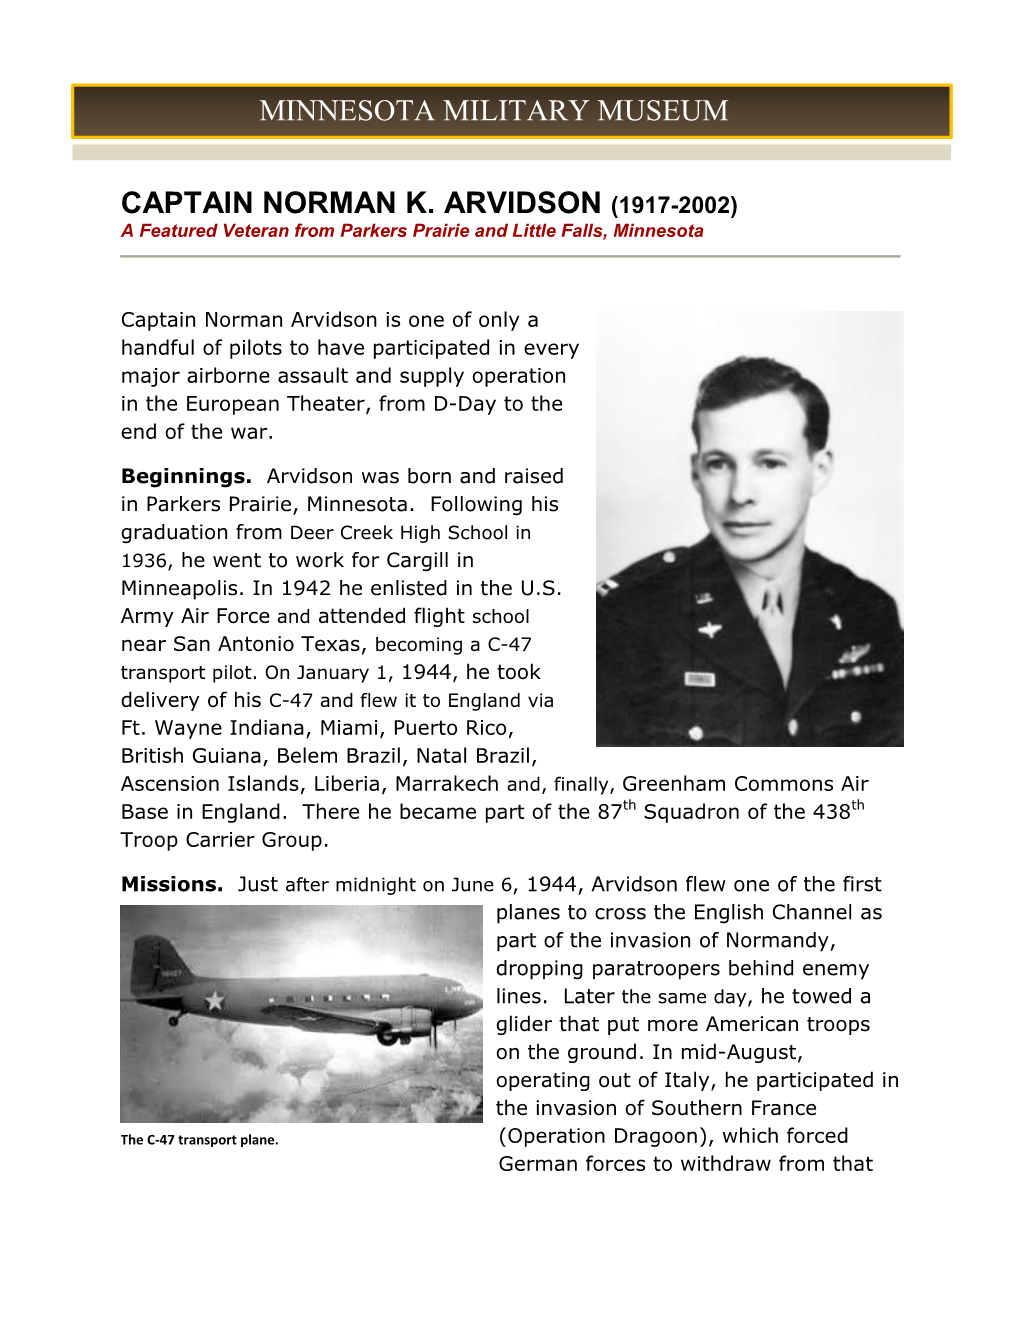 CAPTAIN NORMAN K. ARVIDSON (1917-2002) a Featured Veteran from Parkers Prairie and Little Falls, Minnesota